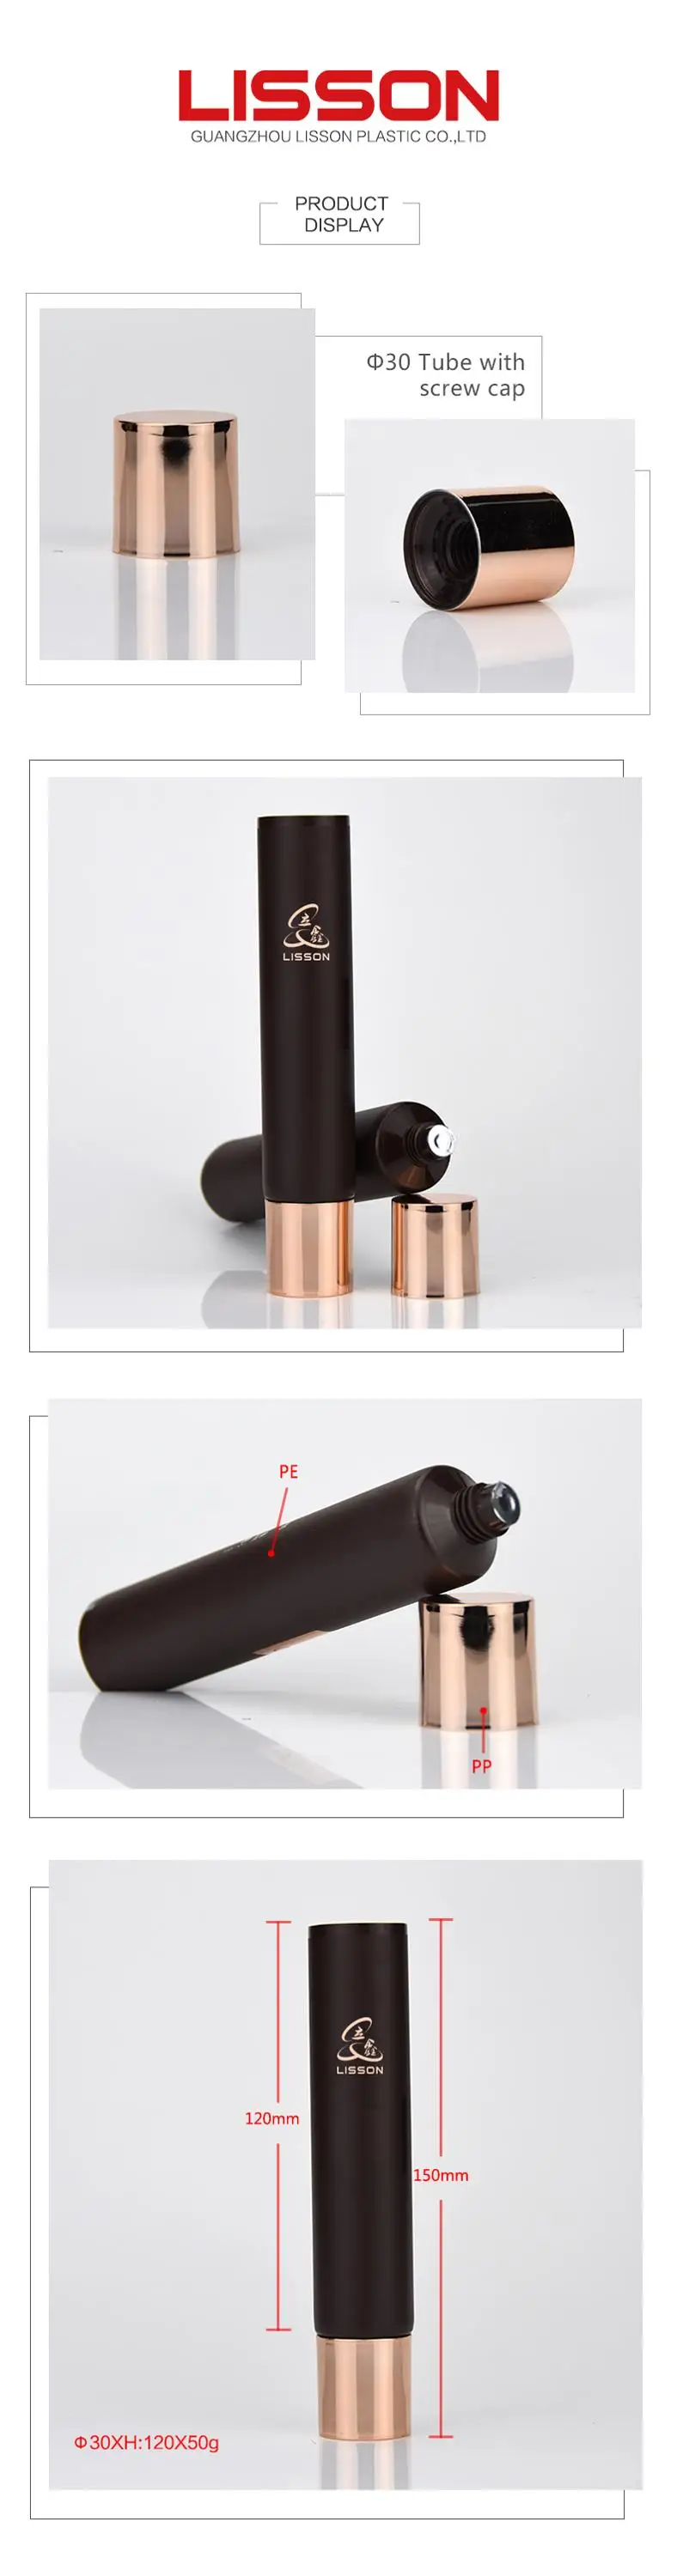 Black Cosmetic Packaging Tube Long Nozzle Head Packaging for hand cream